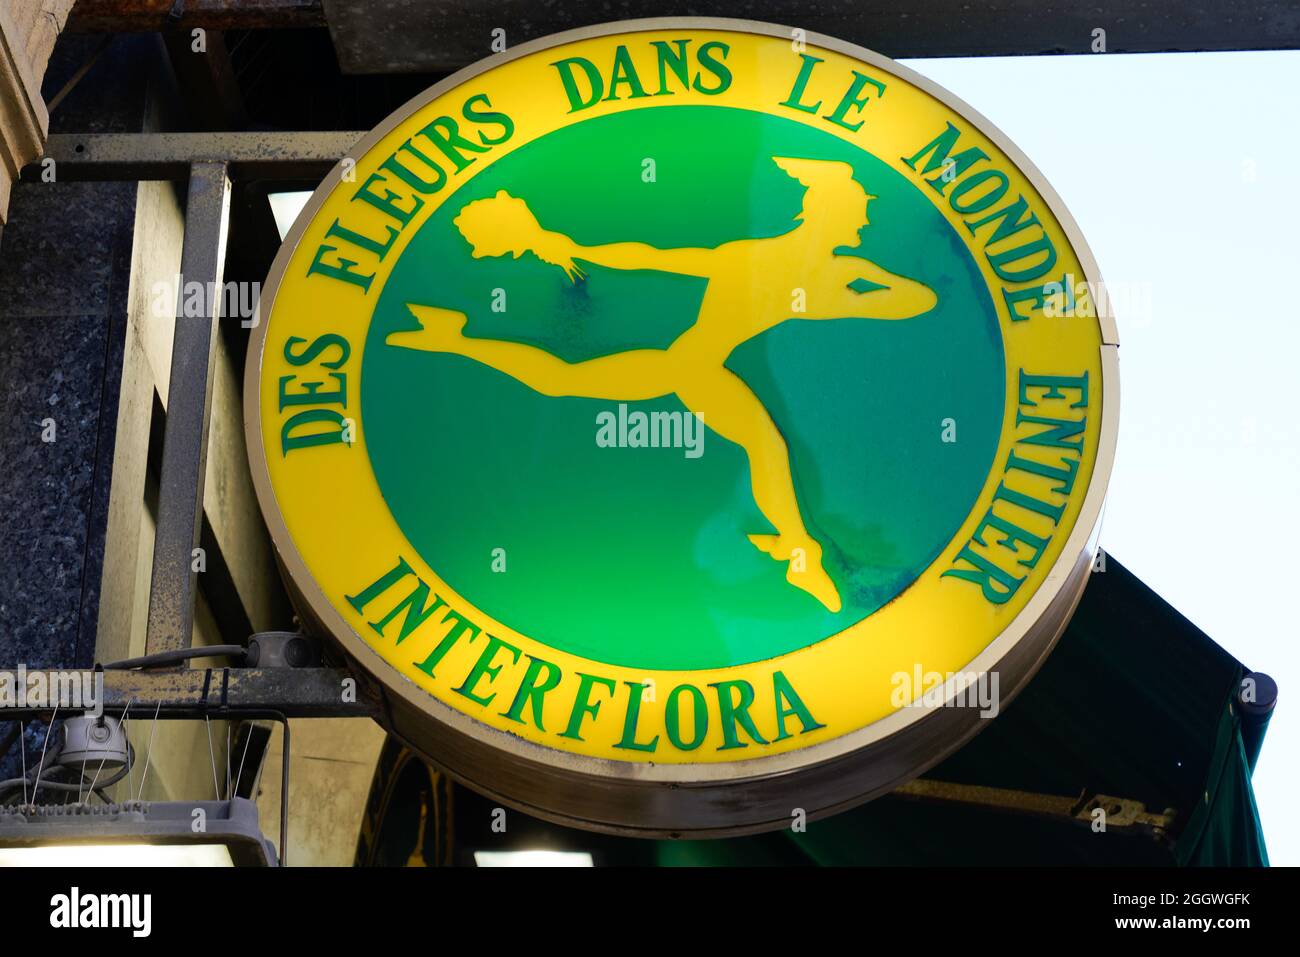 Bordeaux , Aquitaine  France - 12 25 2020 : interflora logo sign and brand text of shop flowers delivery network with affiliated flower deliver store Stock Photo